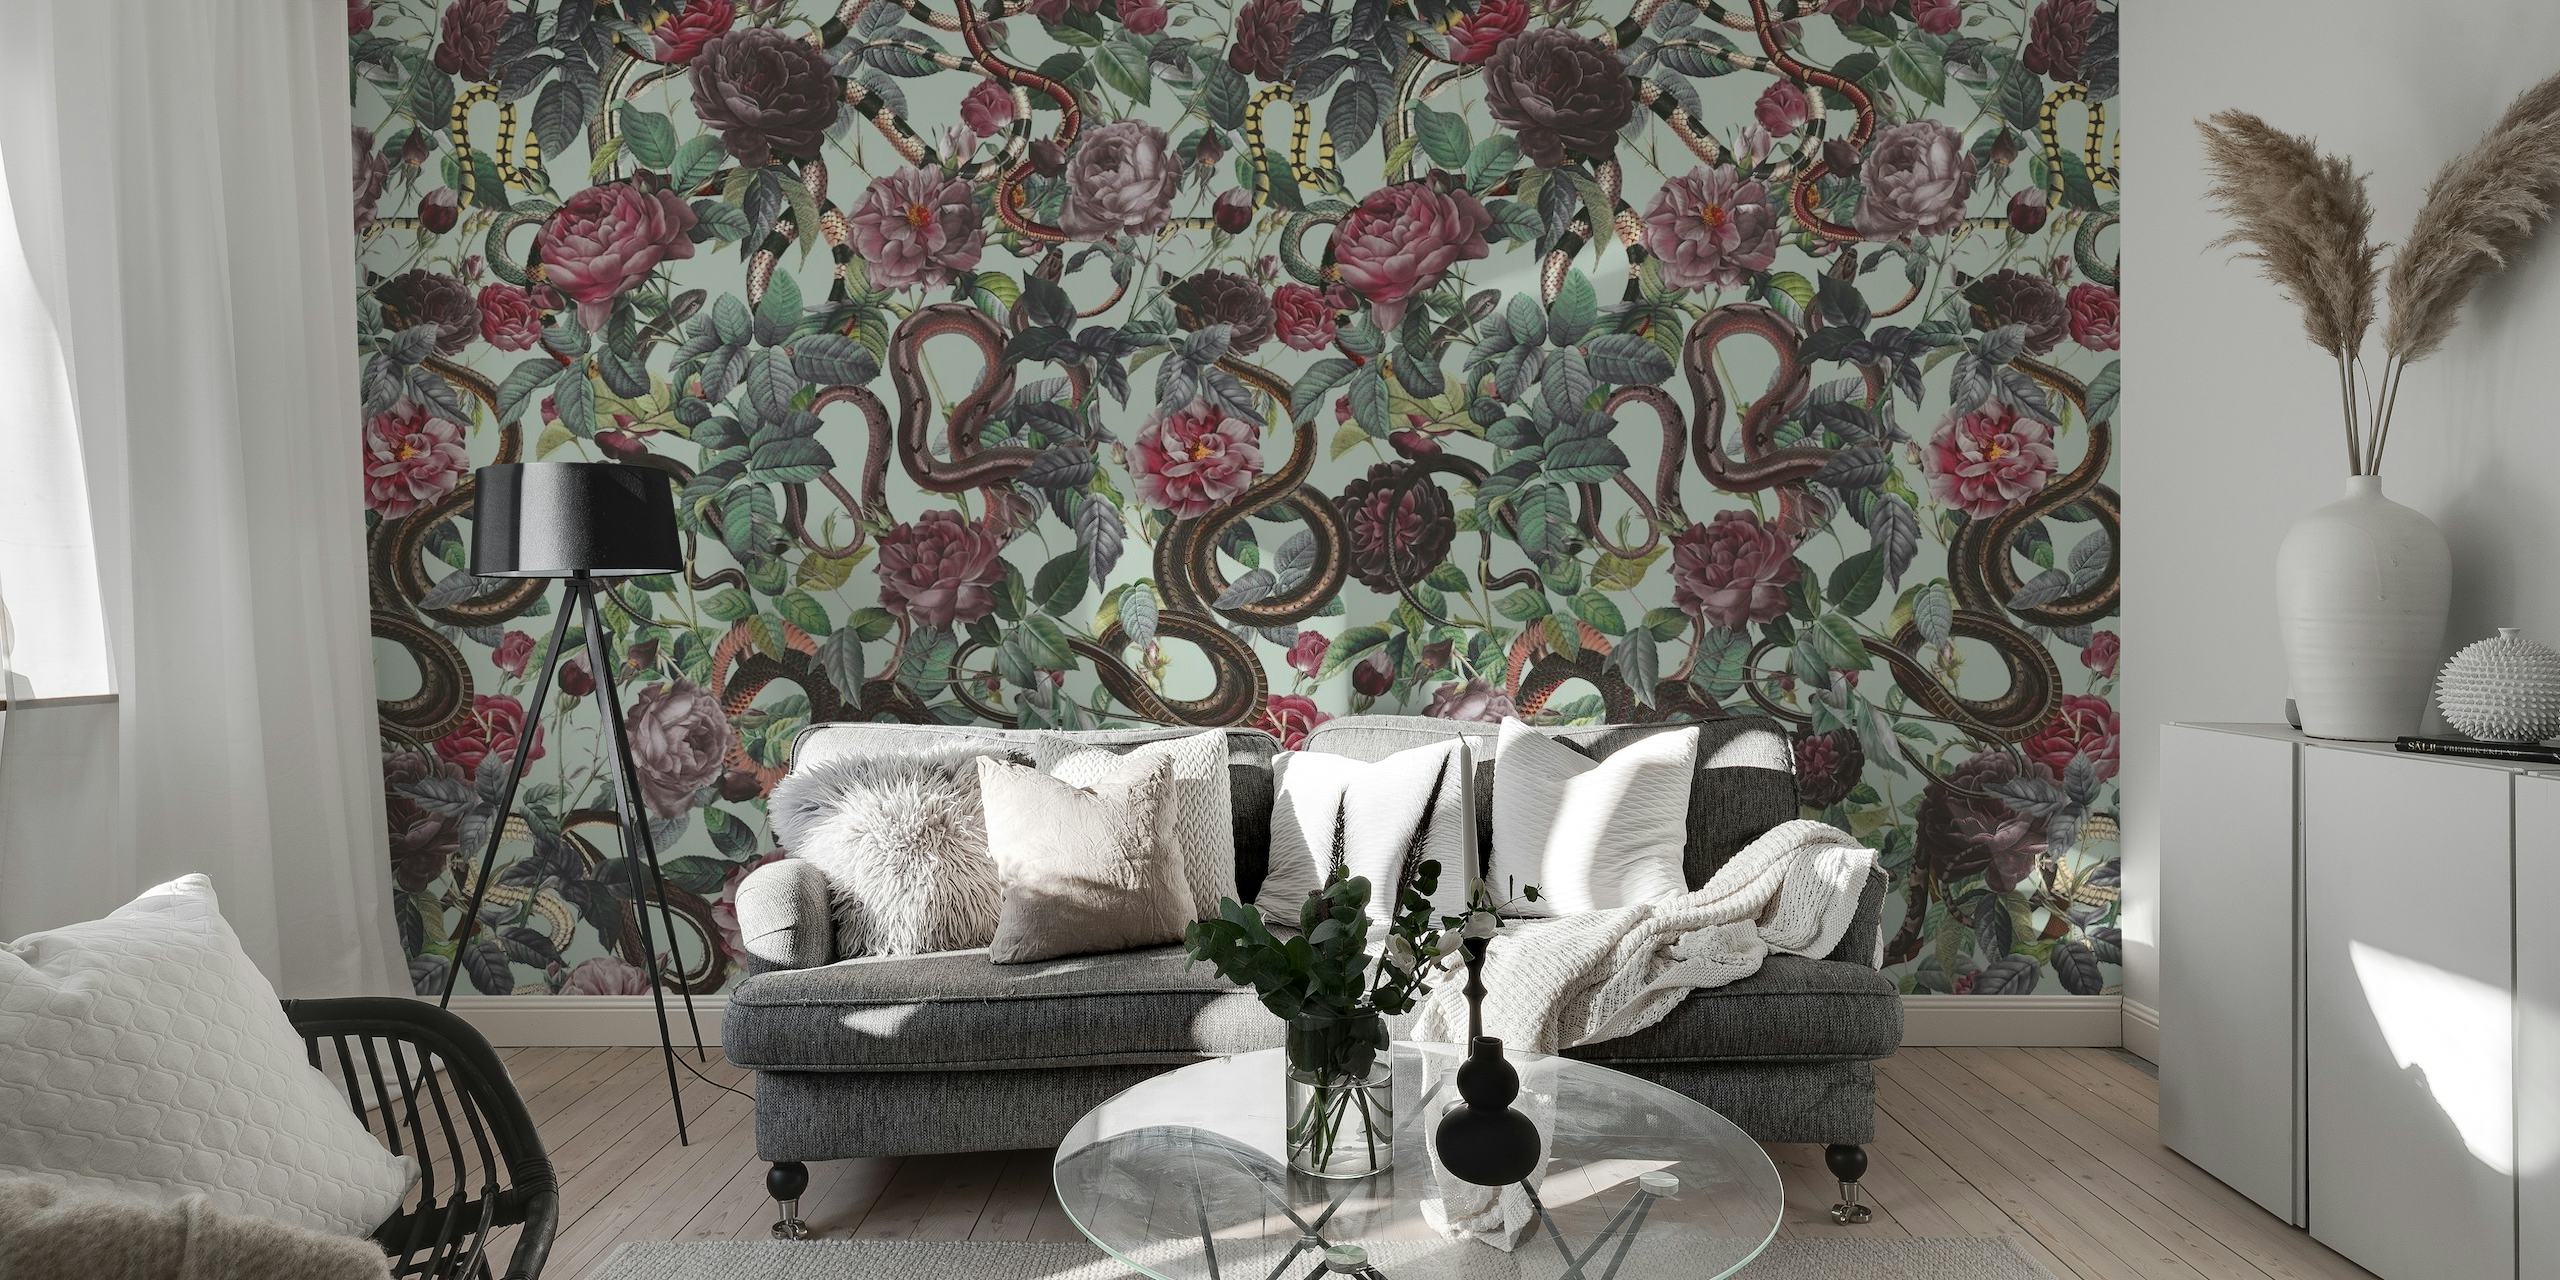 Wall mural featuring a pattern of intertwining snakes and lush roses against a detailed background.